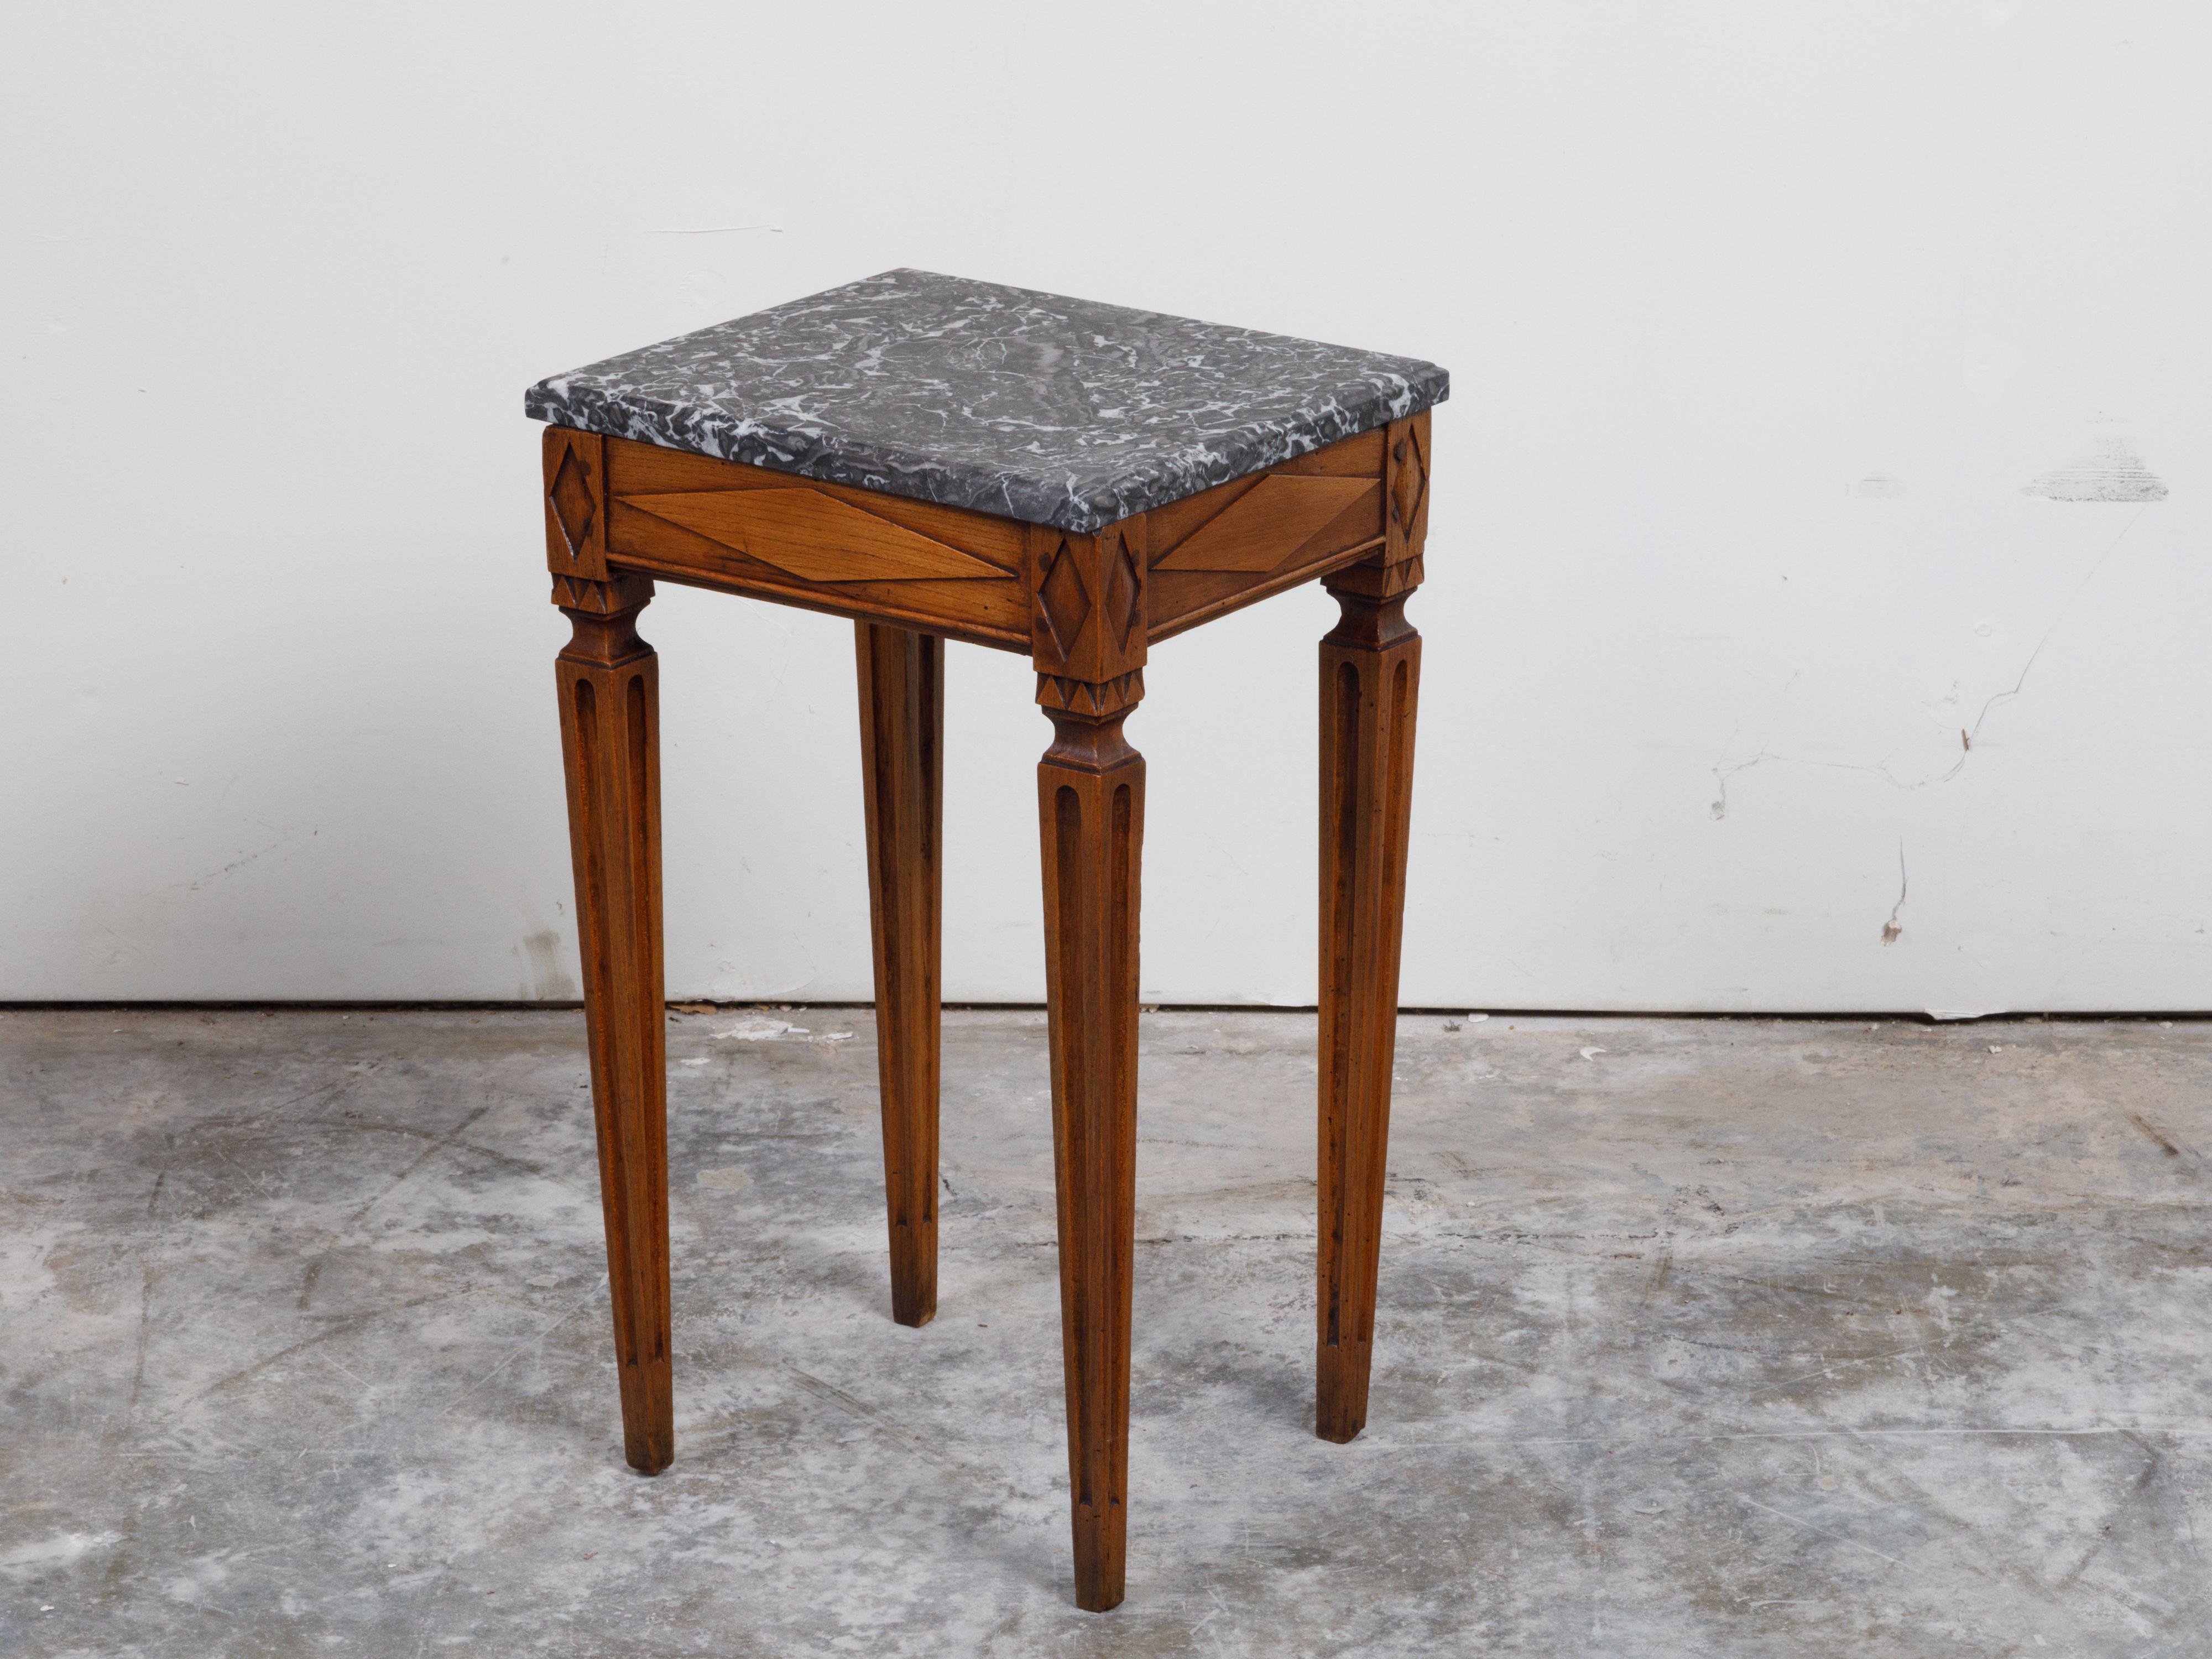 French Neoclassical Style 19th Century Wooden Table with Grey Veined Marble Top For Sale 6